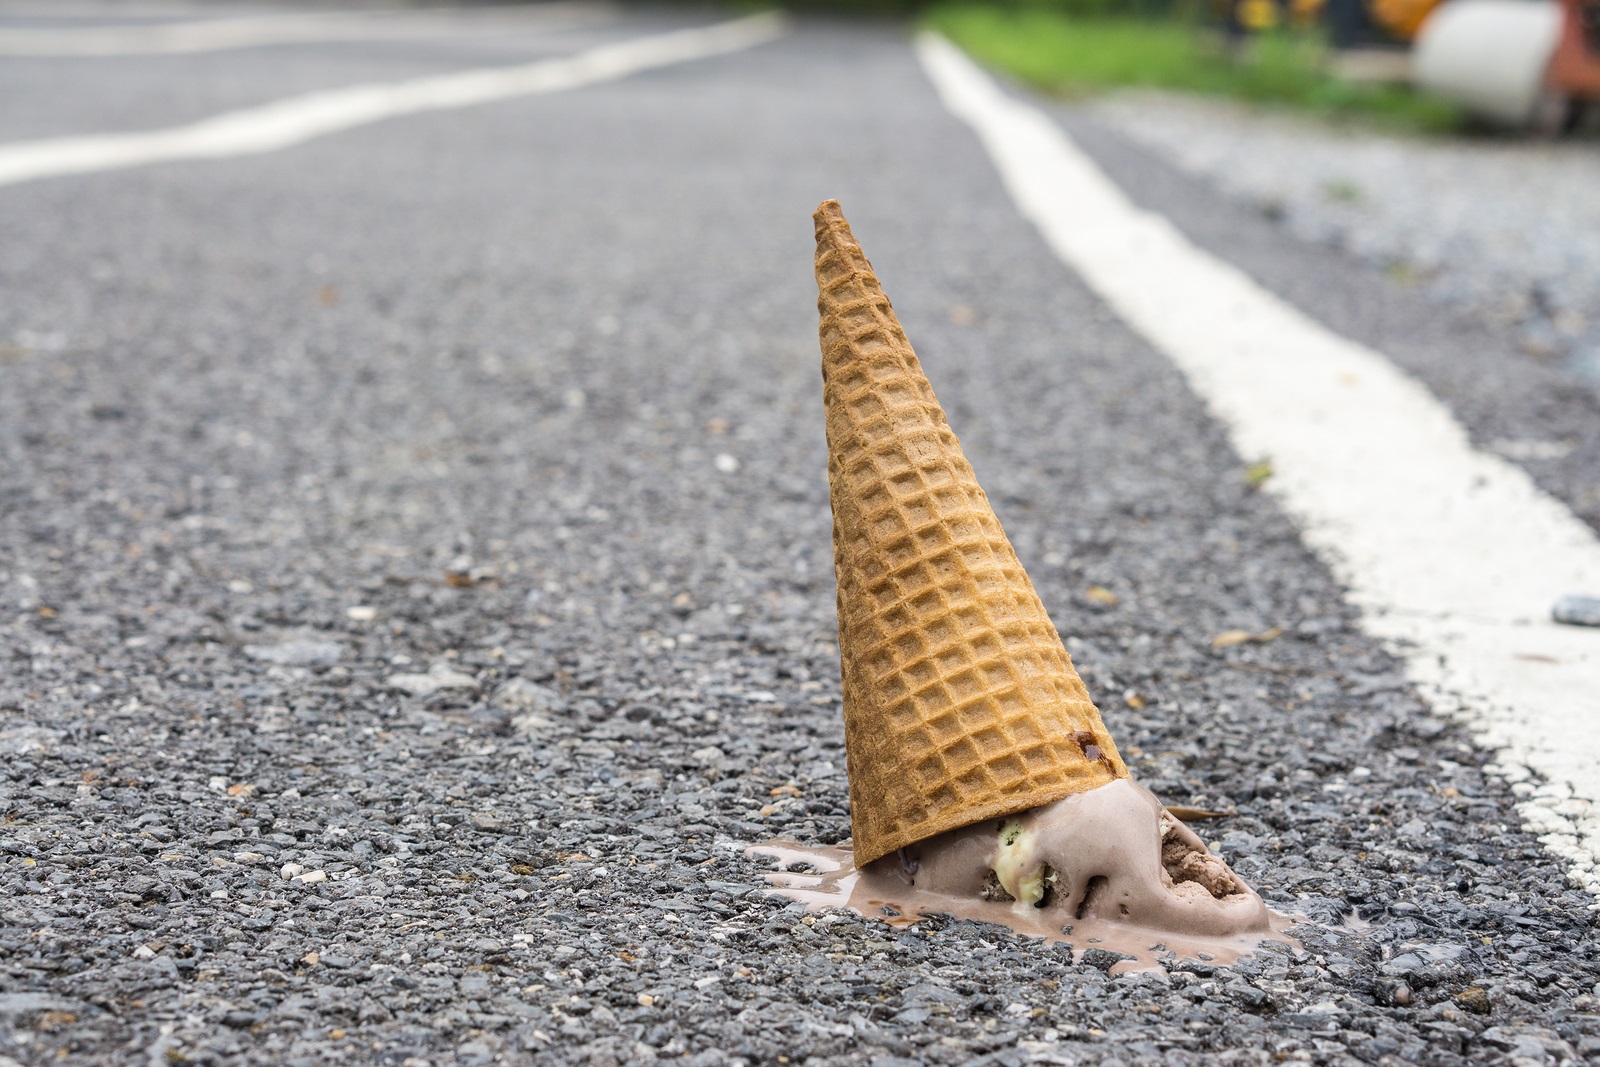 Ice cream on the ground. (selective focus)., chocolate ice cream cone dropped on the concrete floor and melt on ground. with copy space for text. dirty concept. lost concept.